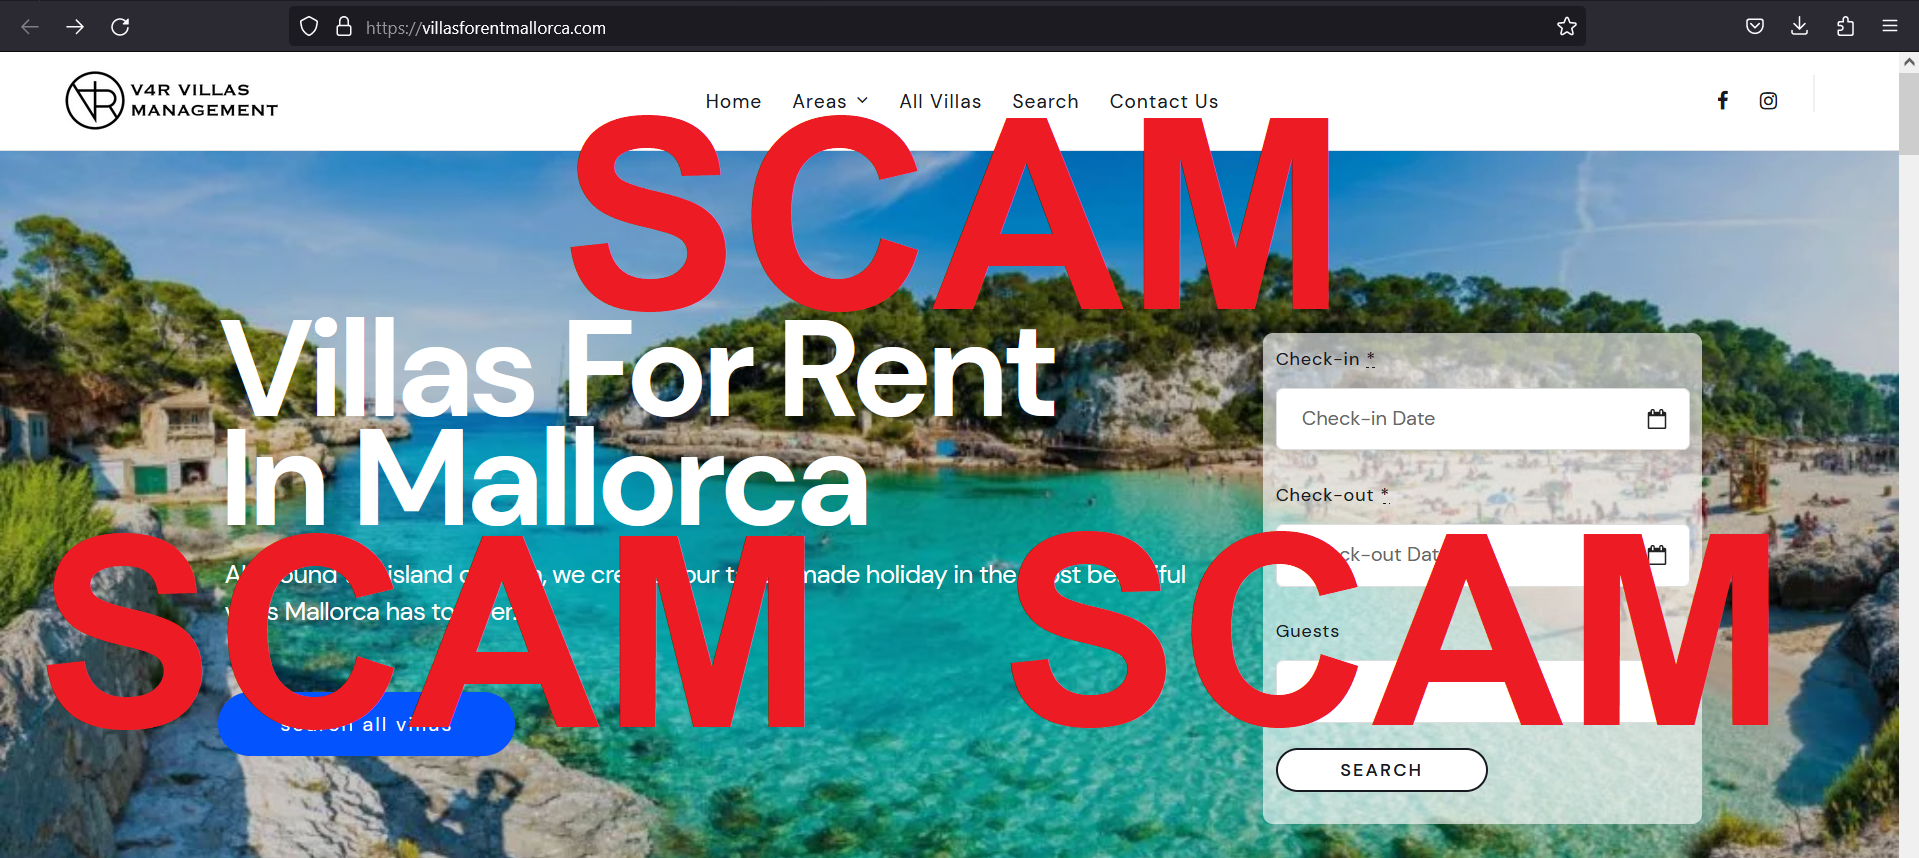 You are currently viewing Fraudulent website: villasforentmallorca.com SCAM SCAM